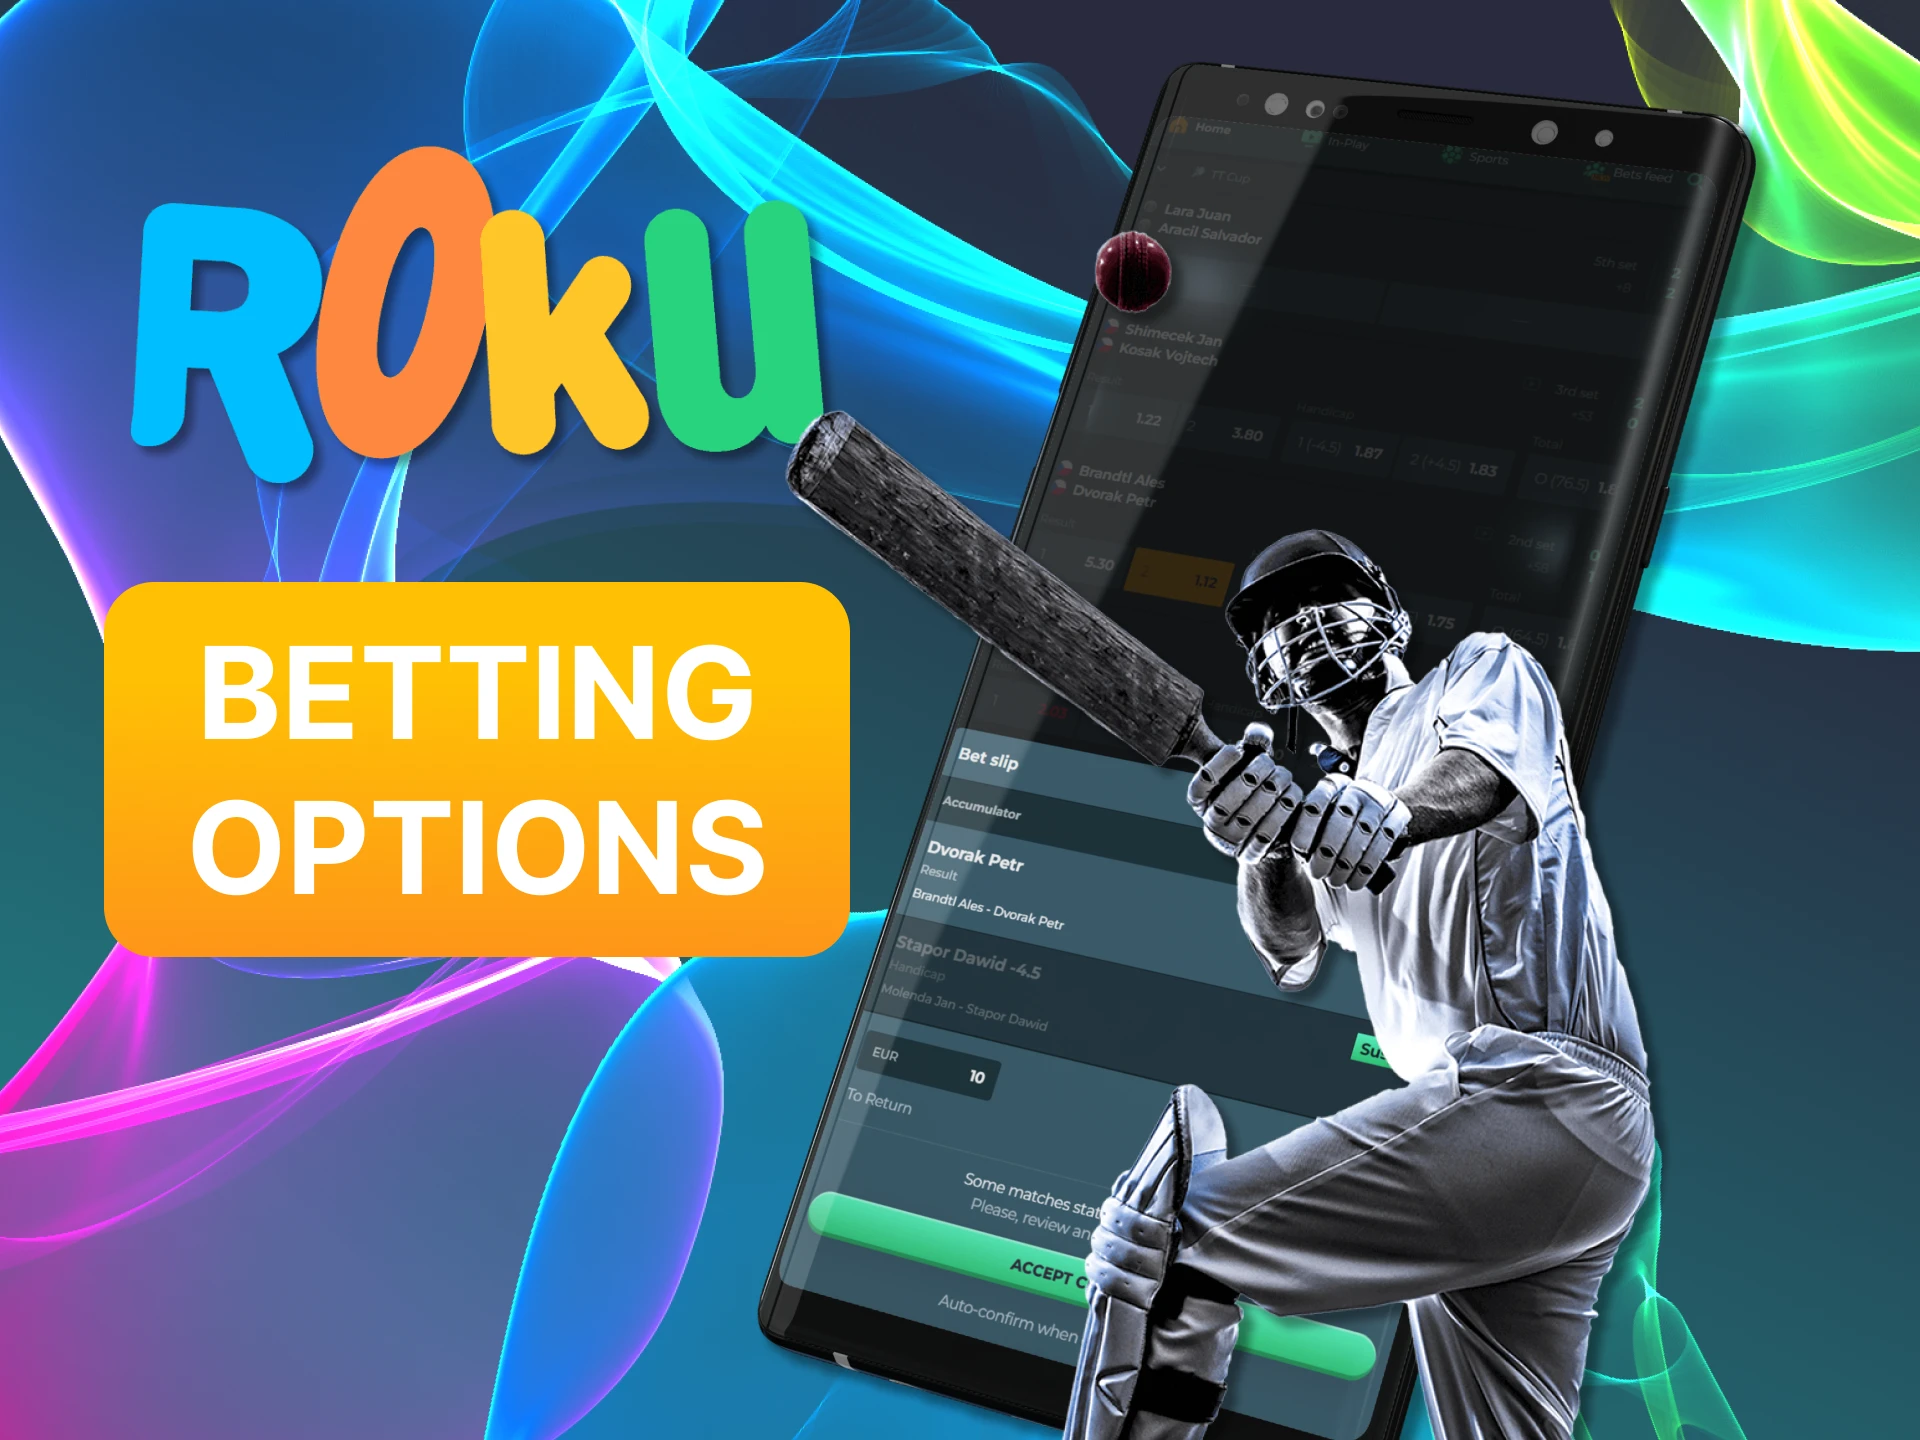 With the Rokubet app you have a variety of options for betting on sports.